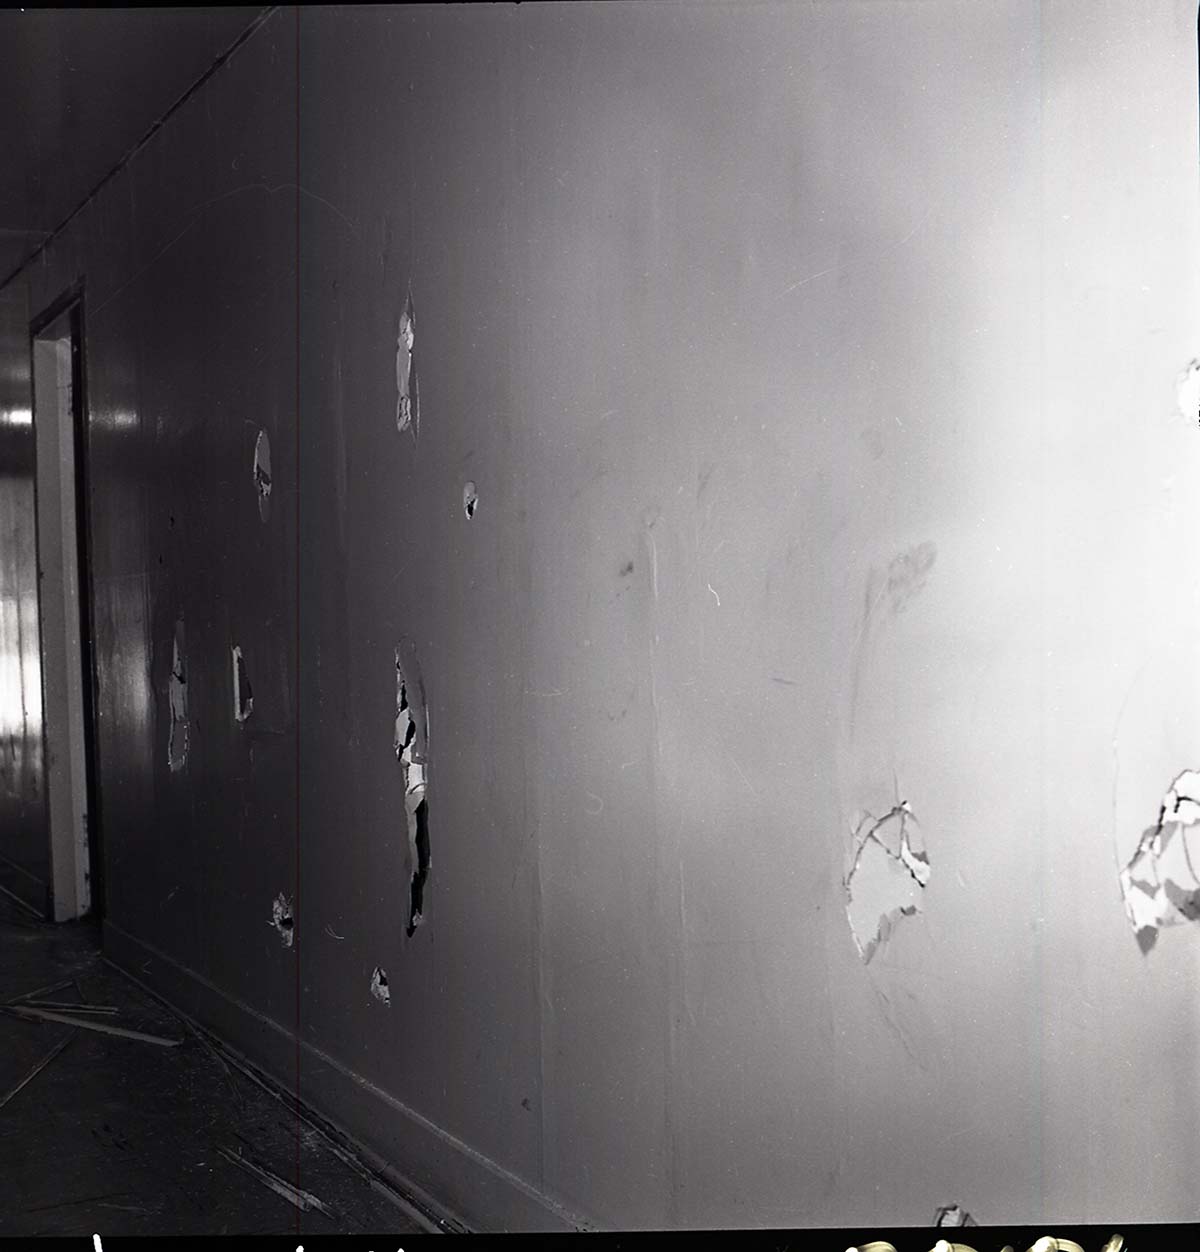 Damage to men's dorm at Zion Lodge. Damage to the hallway walls and floor.